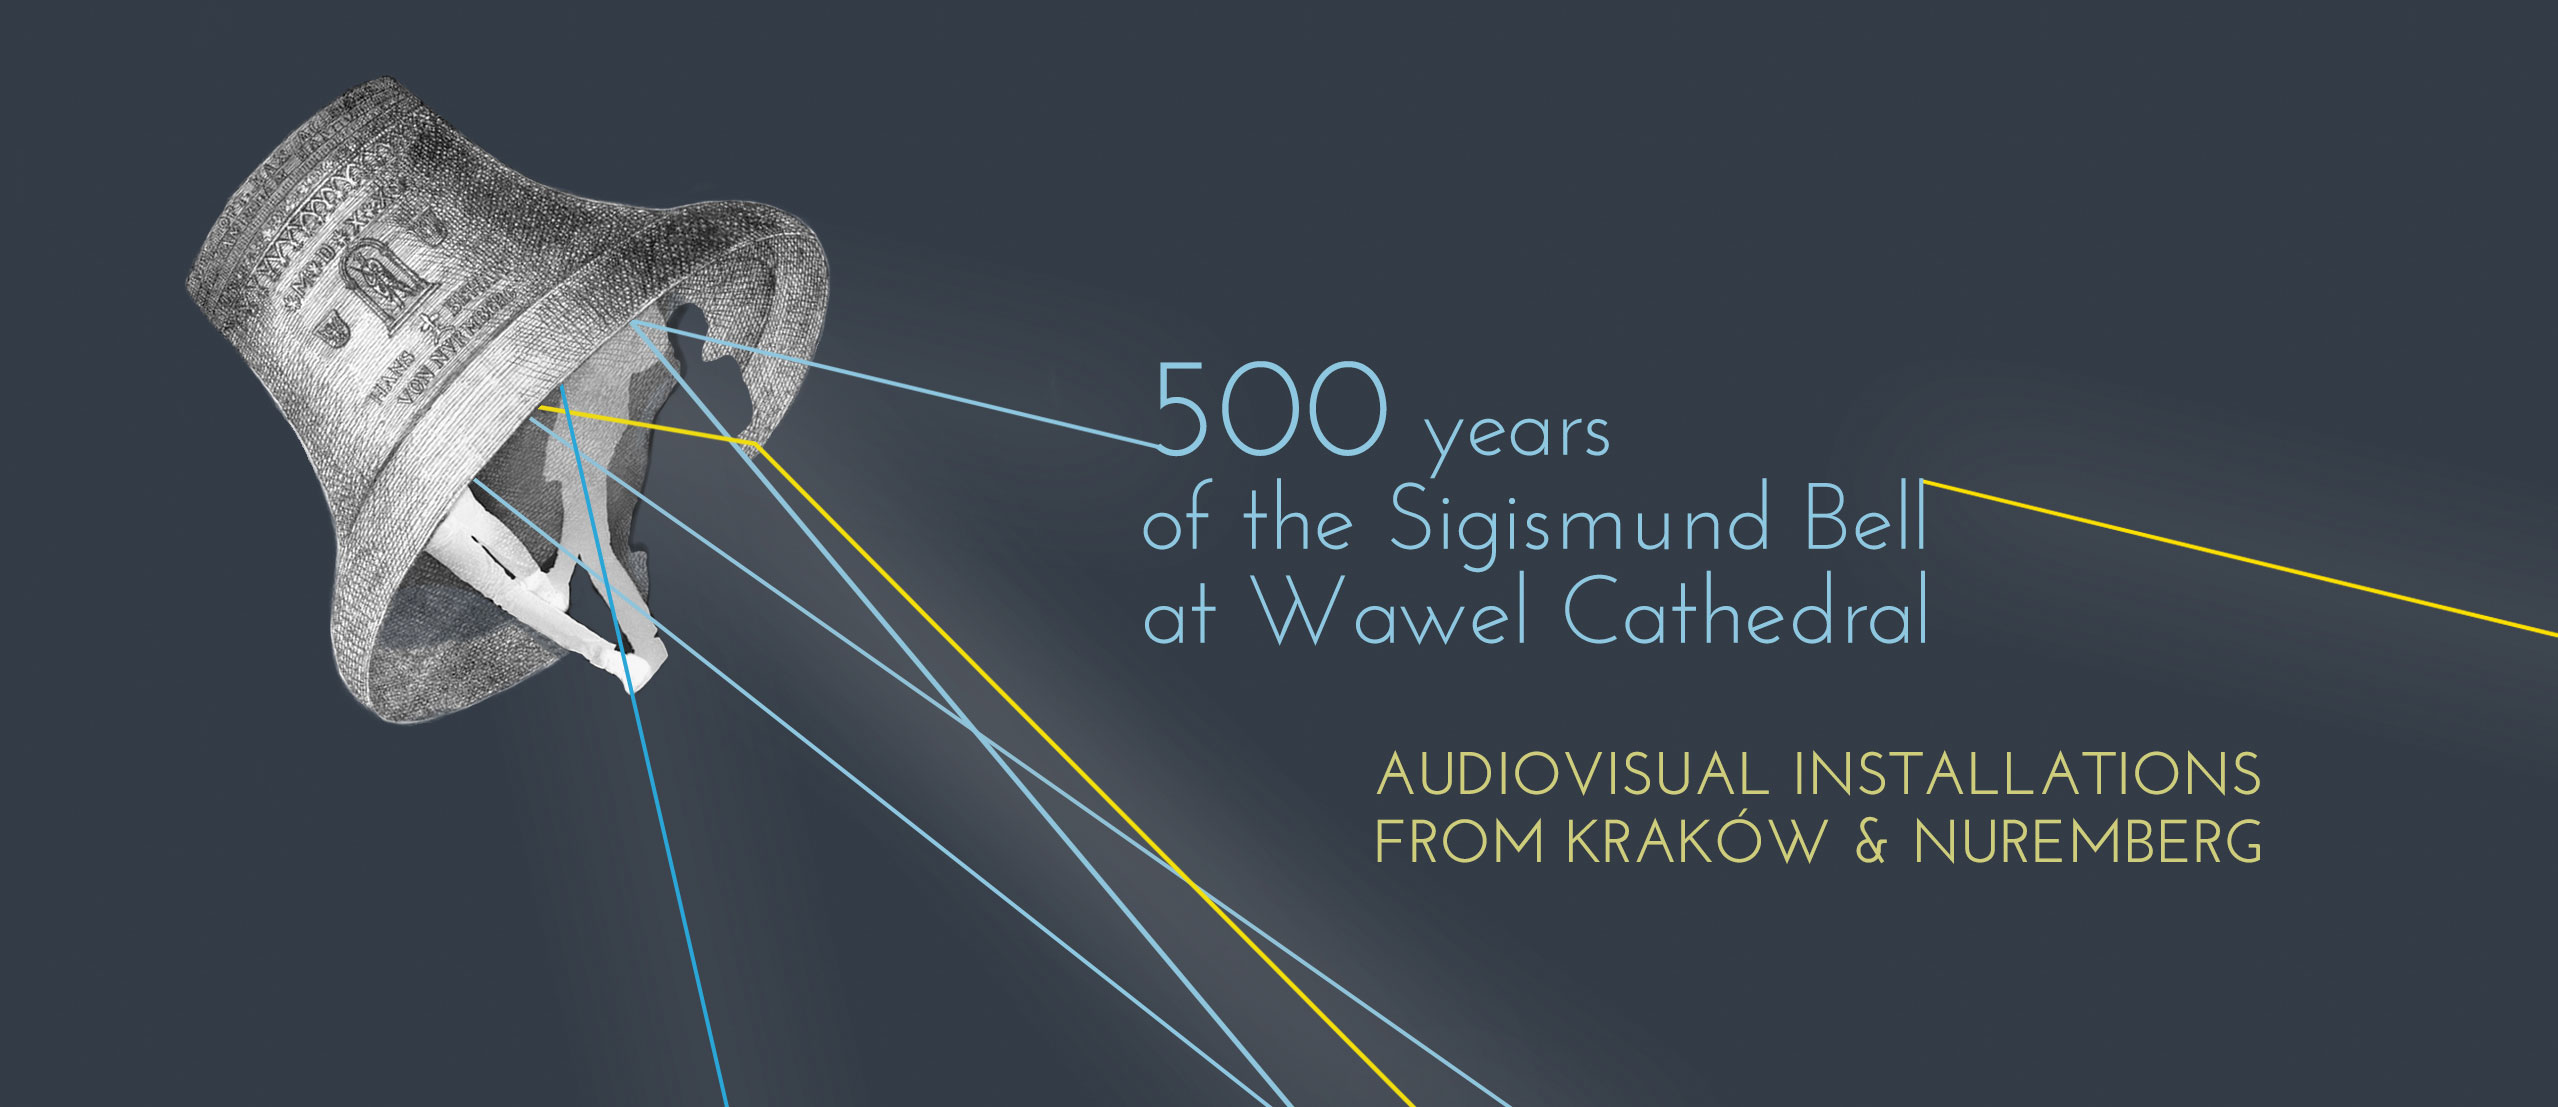 500 years of the Sigismund Bell of Wawel Cathedral | audiovisual installations from Kraków & Nuremberg